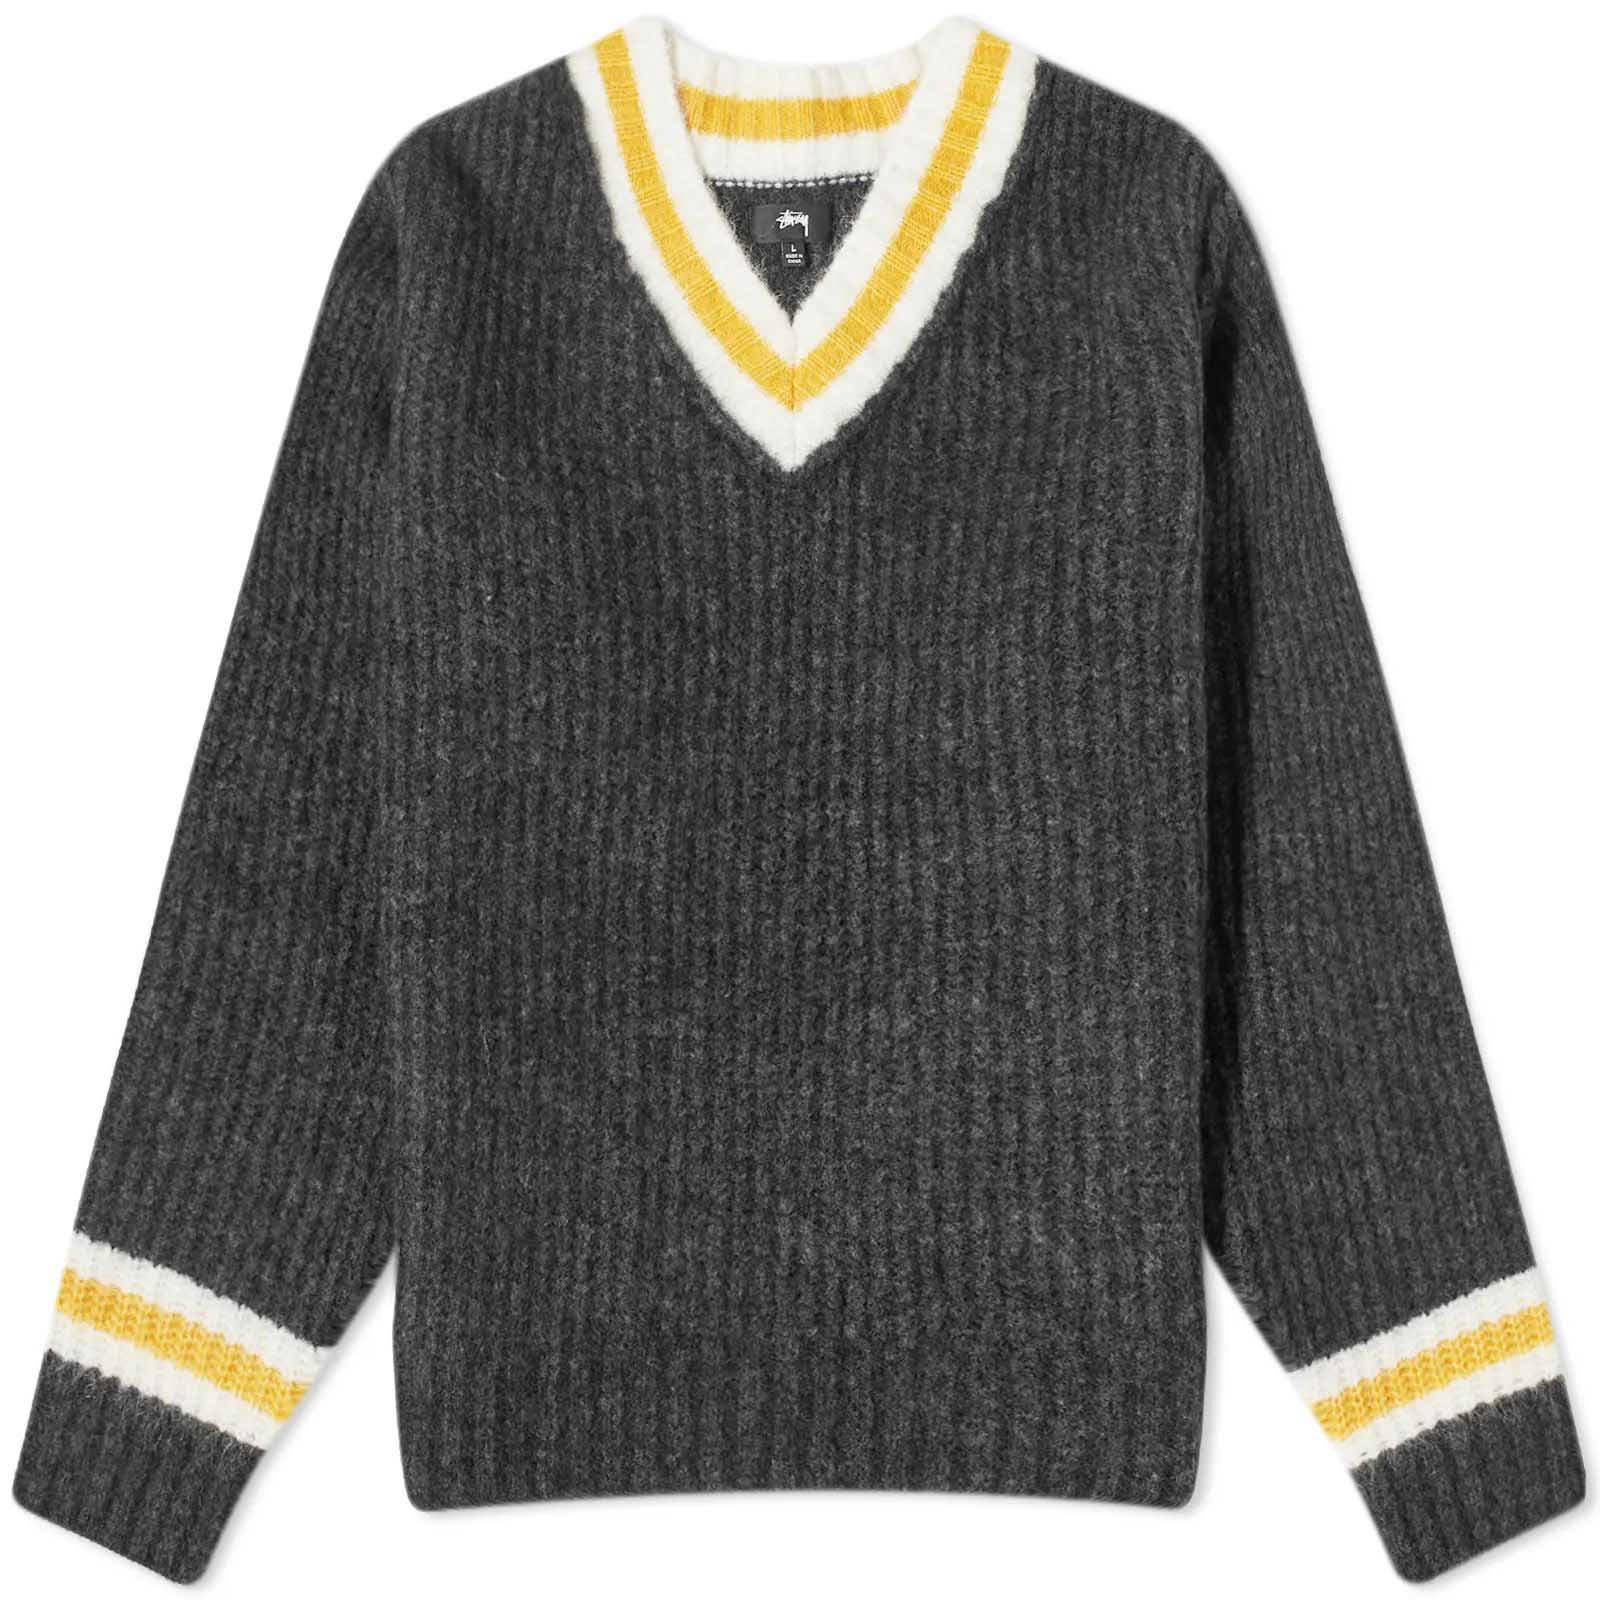 Stüssy Mohair Tennis Sweater | Where To Buy | 117142-GREN | The 